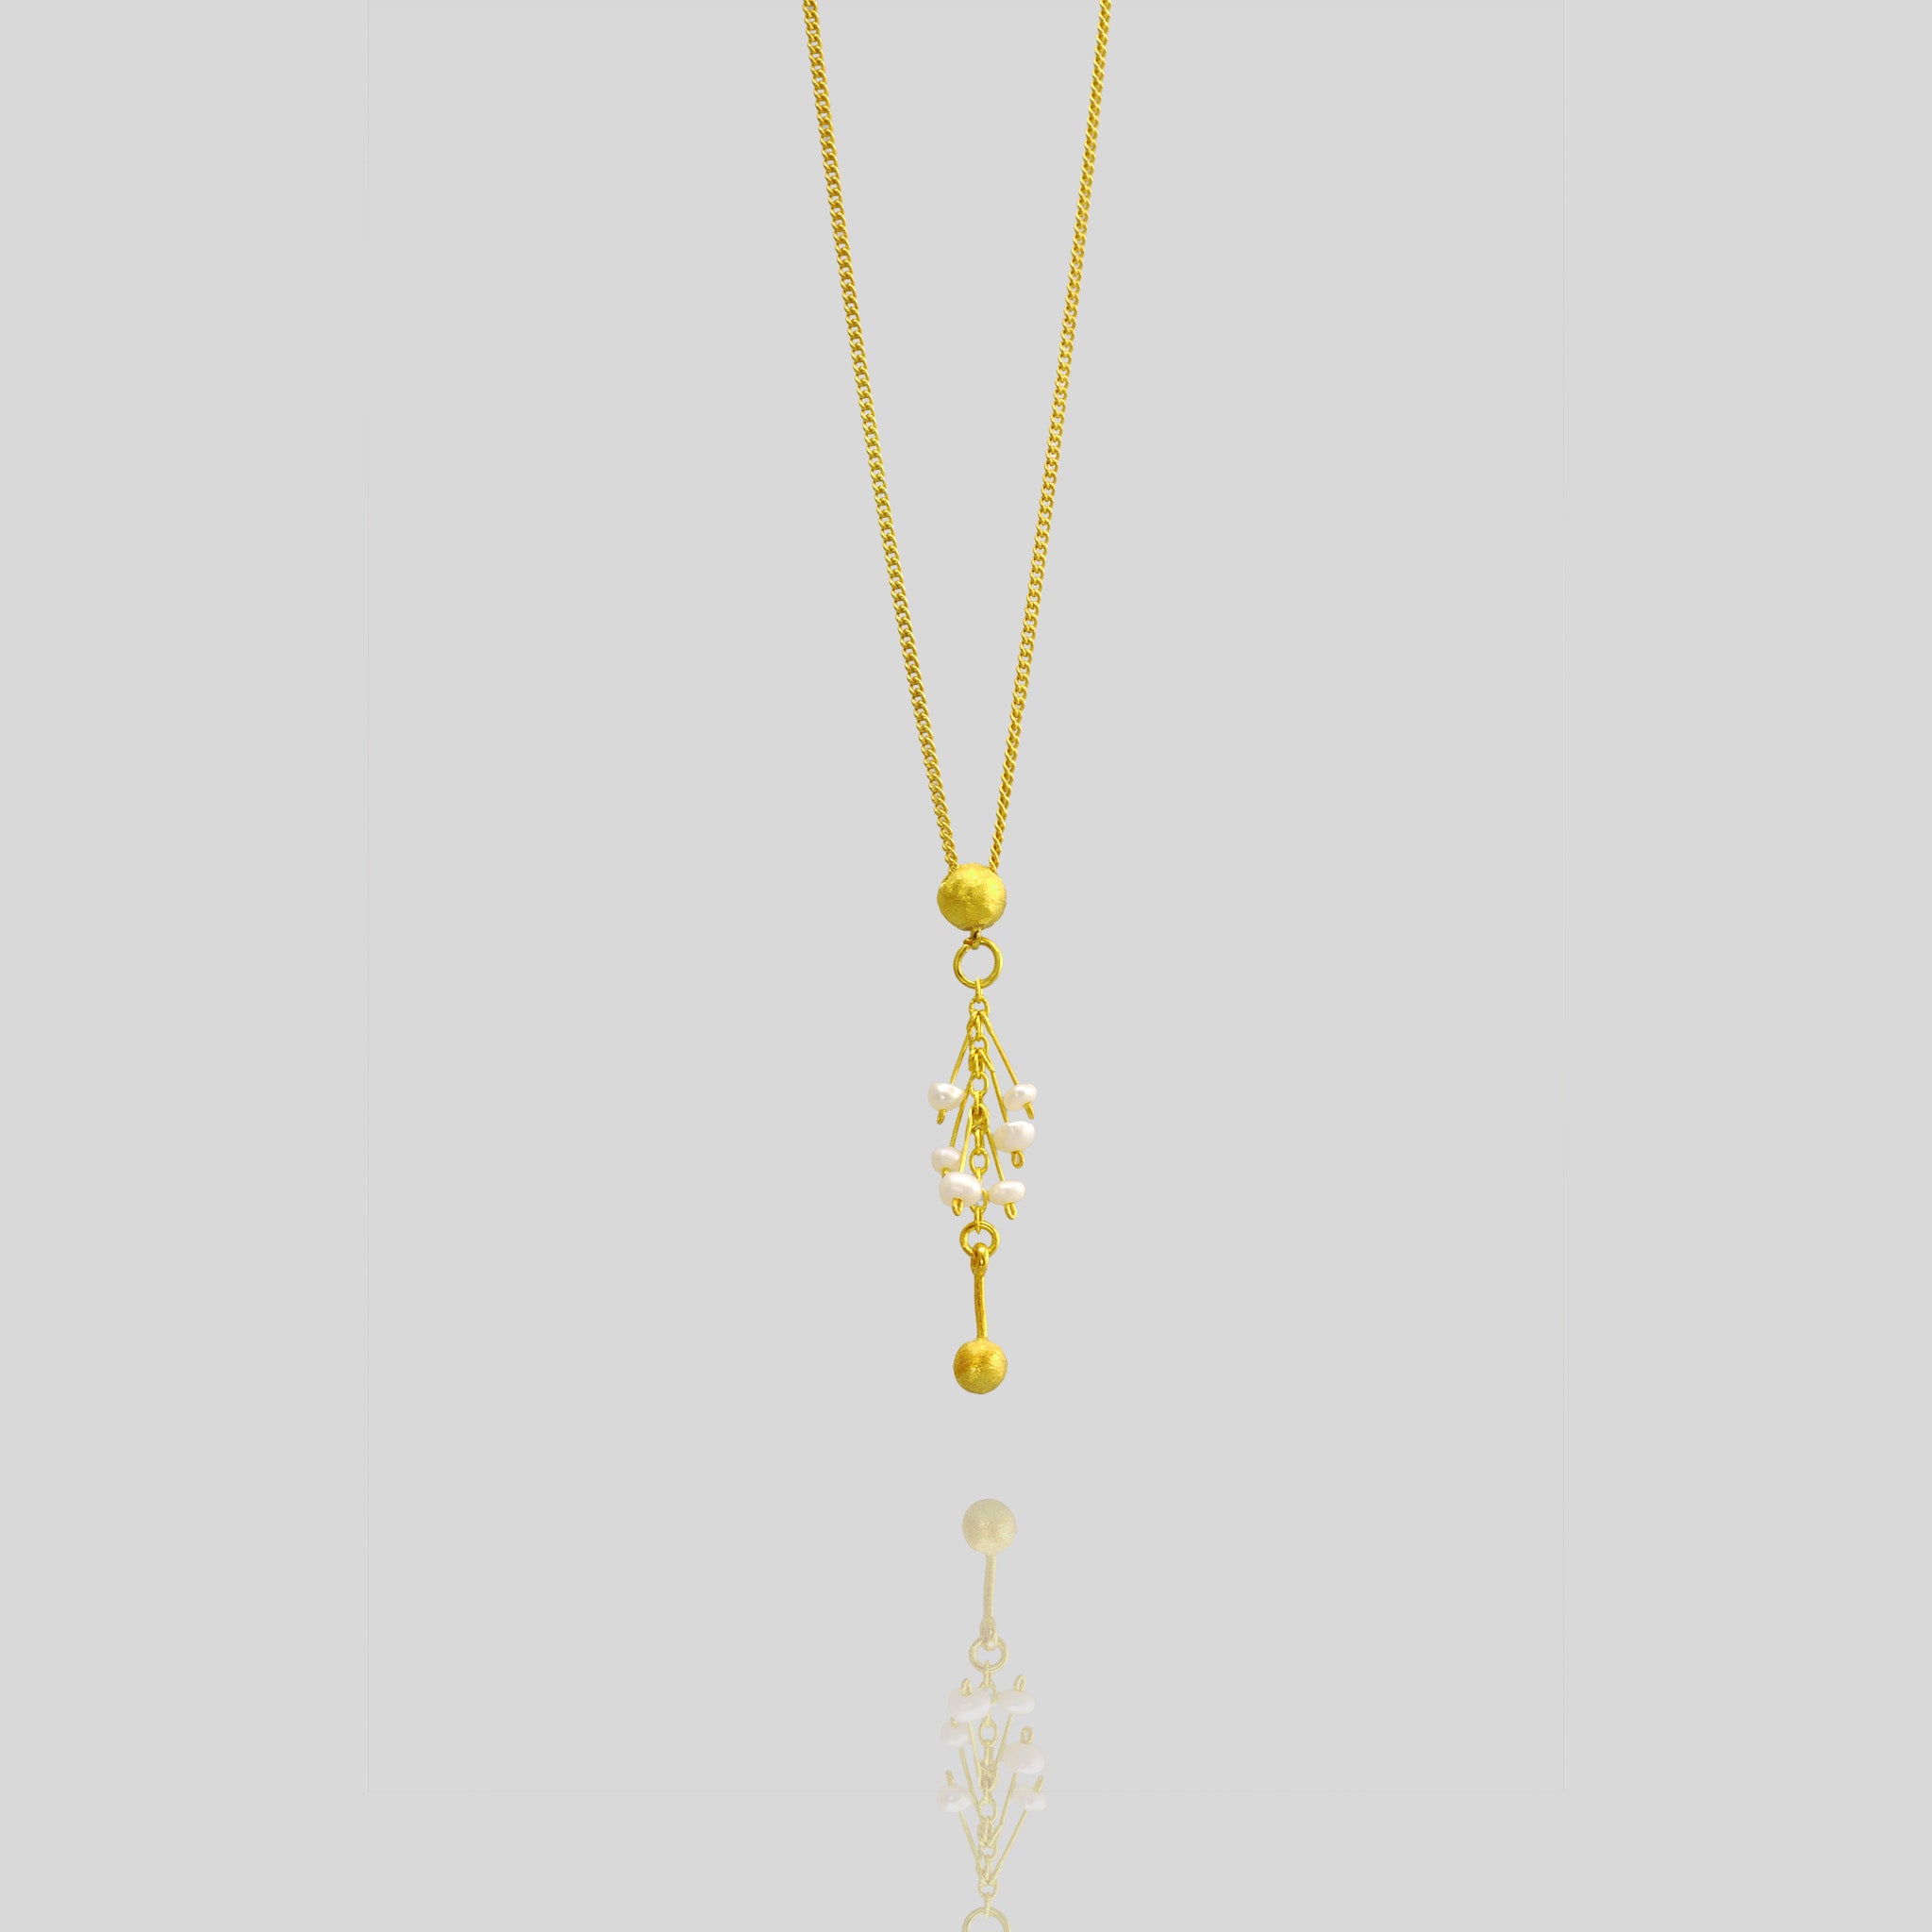 Luxurious Venus Gold & Pearls Pendant - 18-Carat with Half Cap Design and Fine Gold Threads Adorned with Tiny Pearls.